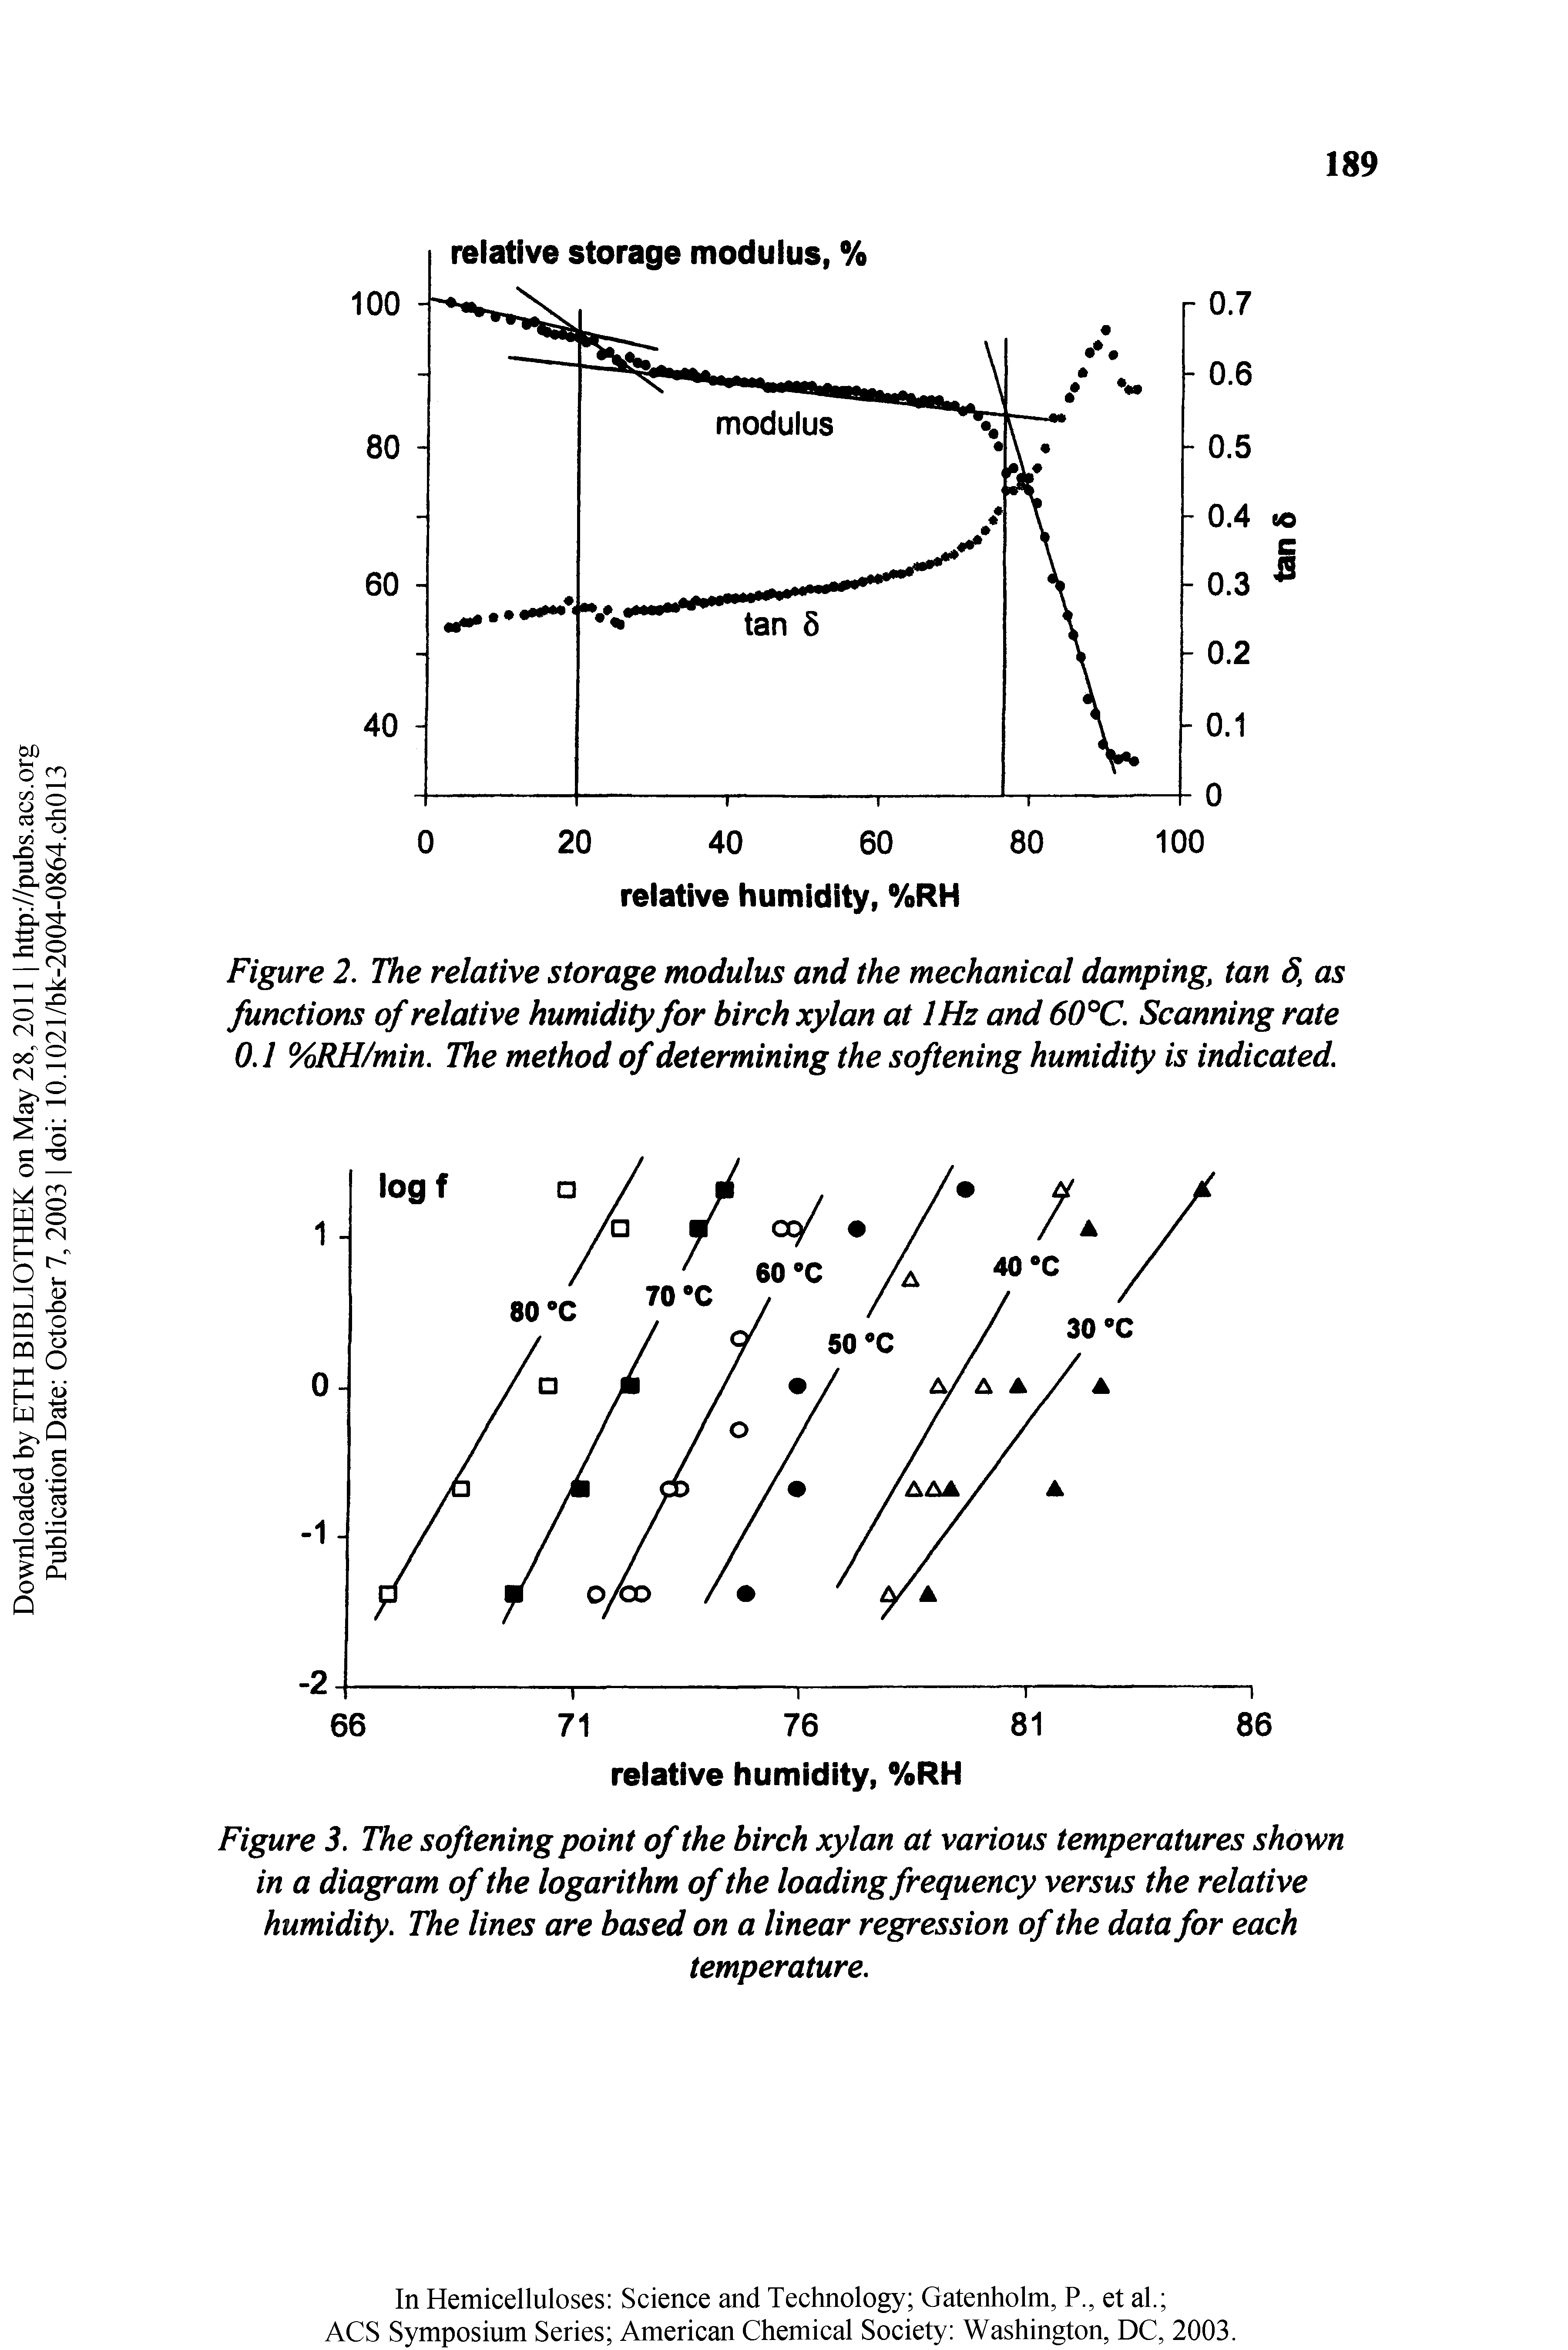 Figure 2. The relative storage modulus and the mechanical damping, tan d, as functions of relative humidity for birch xylan at IHz and 60°C. Scanning rate 0.1 %RH/min. The method of determining the softening humidity is indicated.